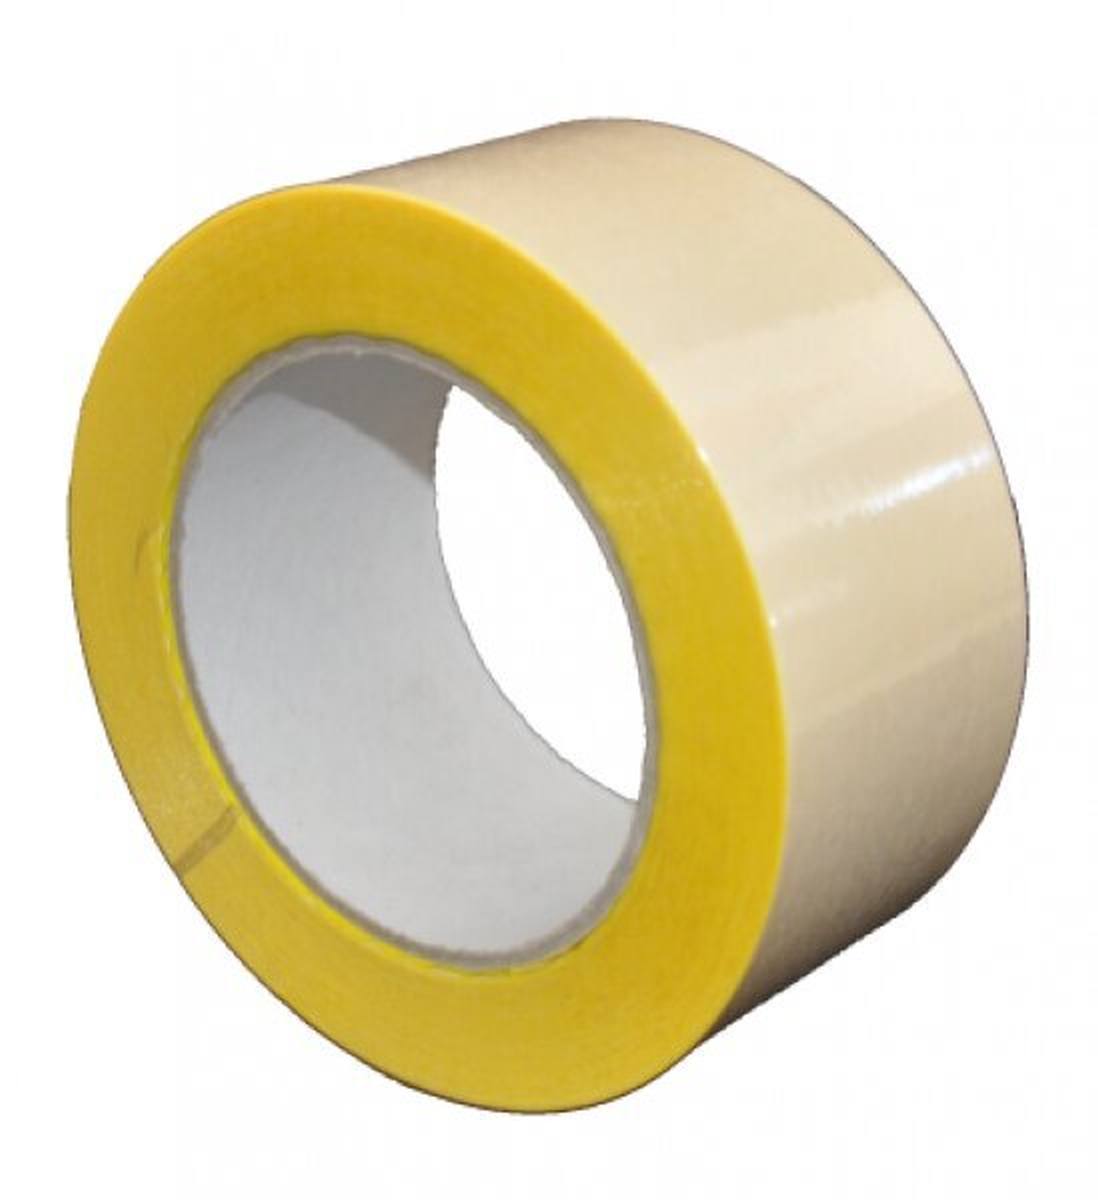 S-K-S 407 Double-sided adhesive tape with polypropylene backing, high / low tack, yellow, 100 mm x 50 m, 0.15 mm